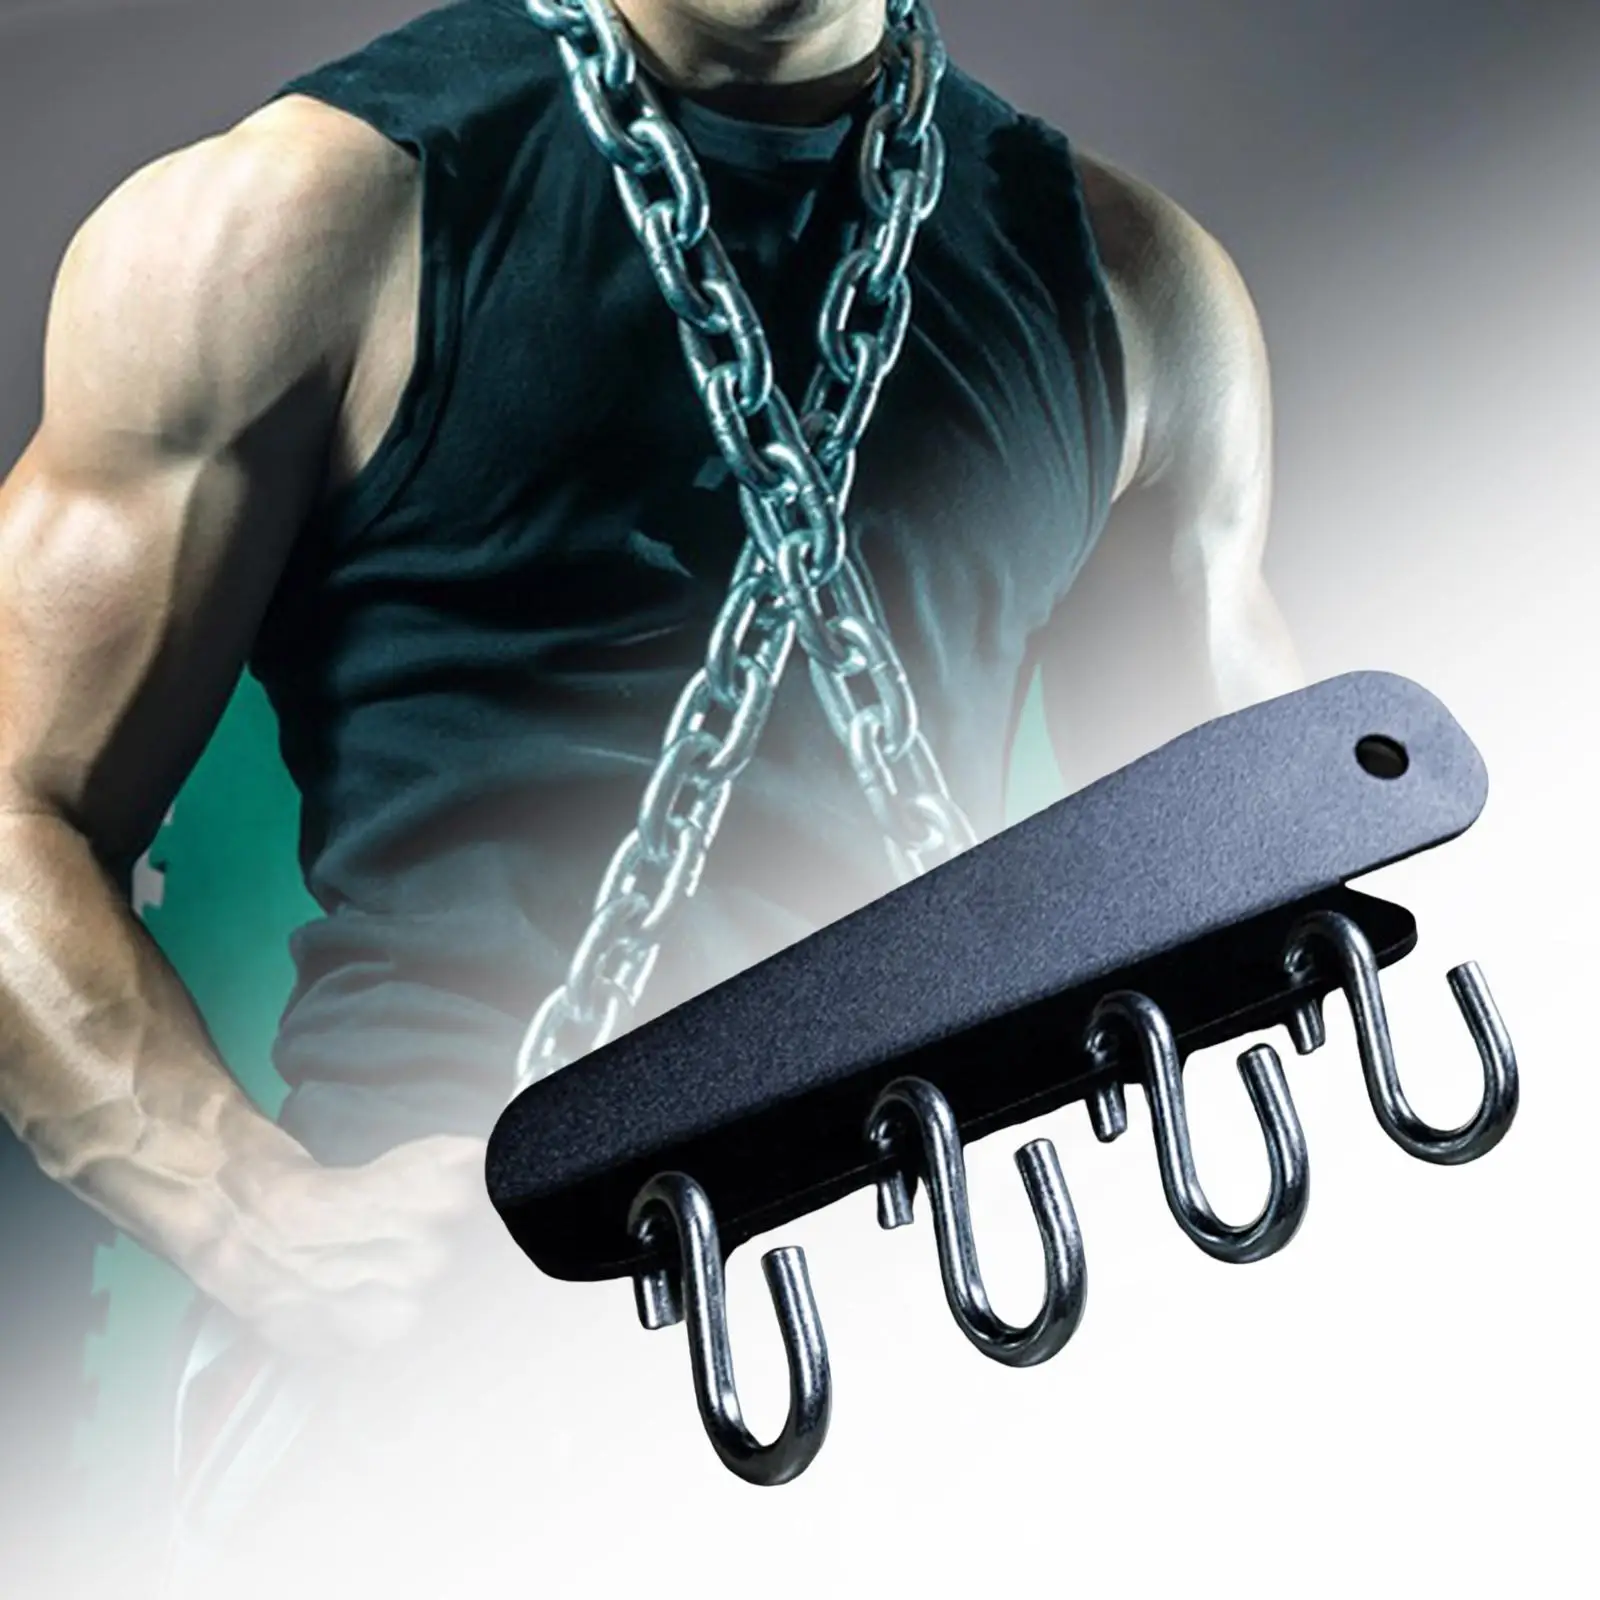 Gym Chains Rack Organizer Holder, Wall Mount, Exercise Training Heavy Duty Wall